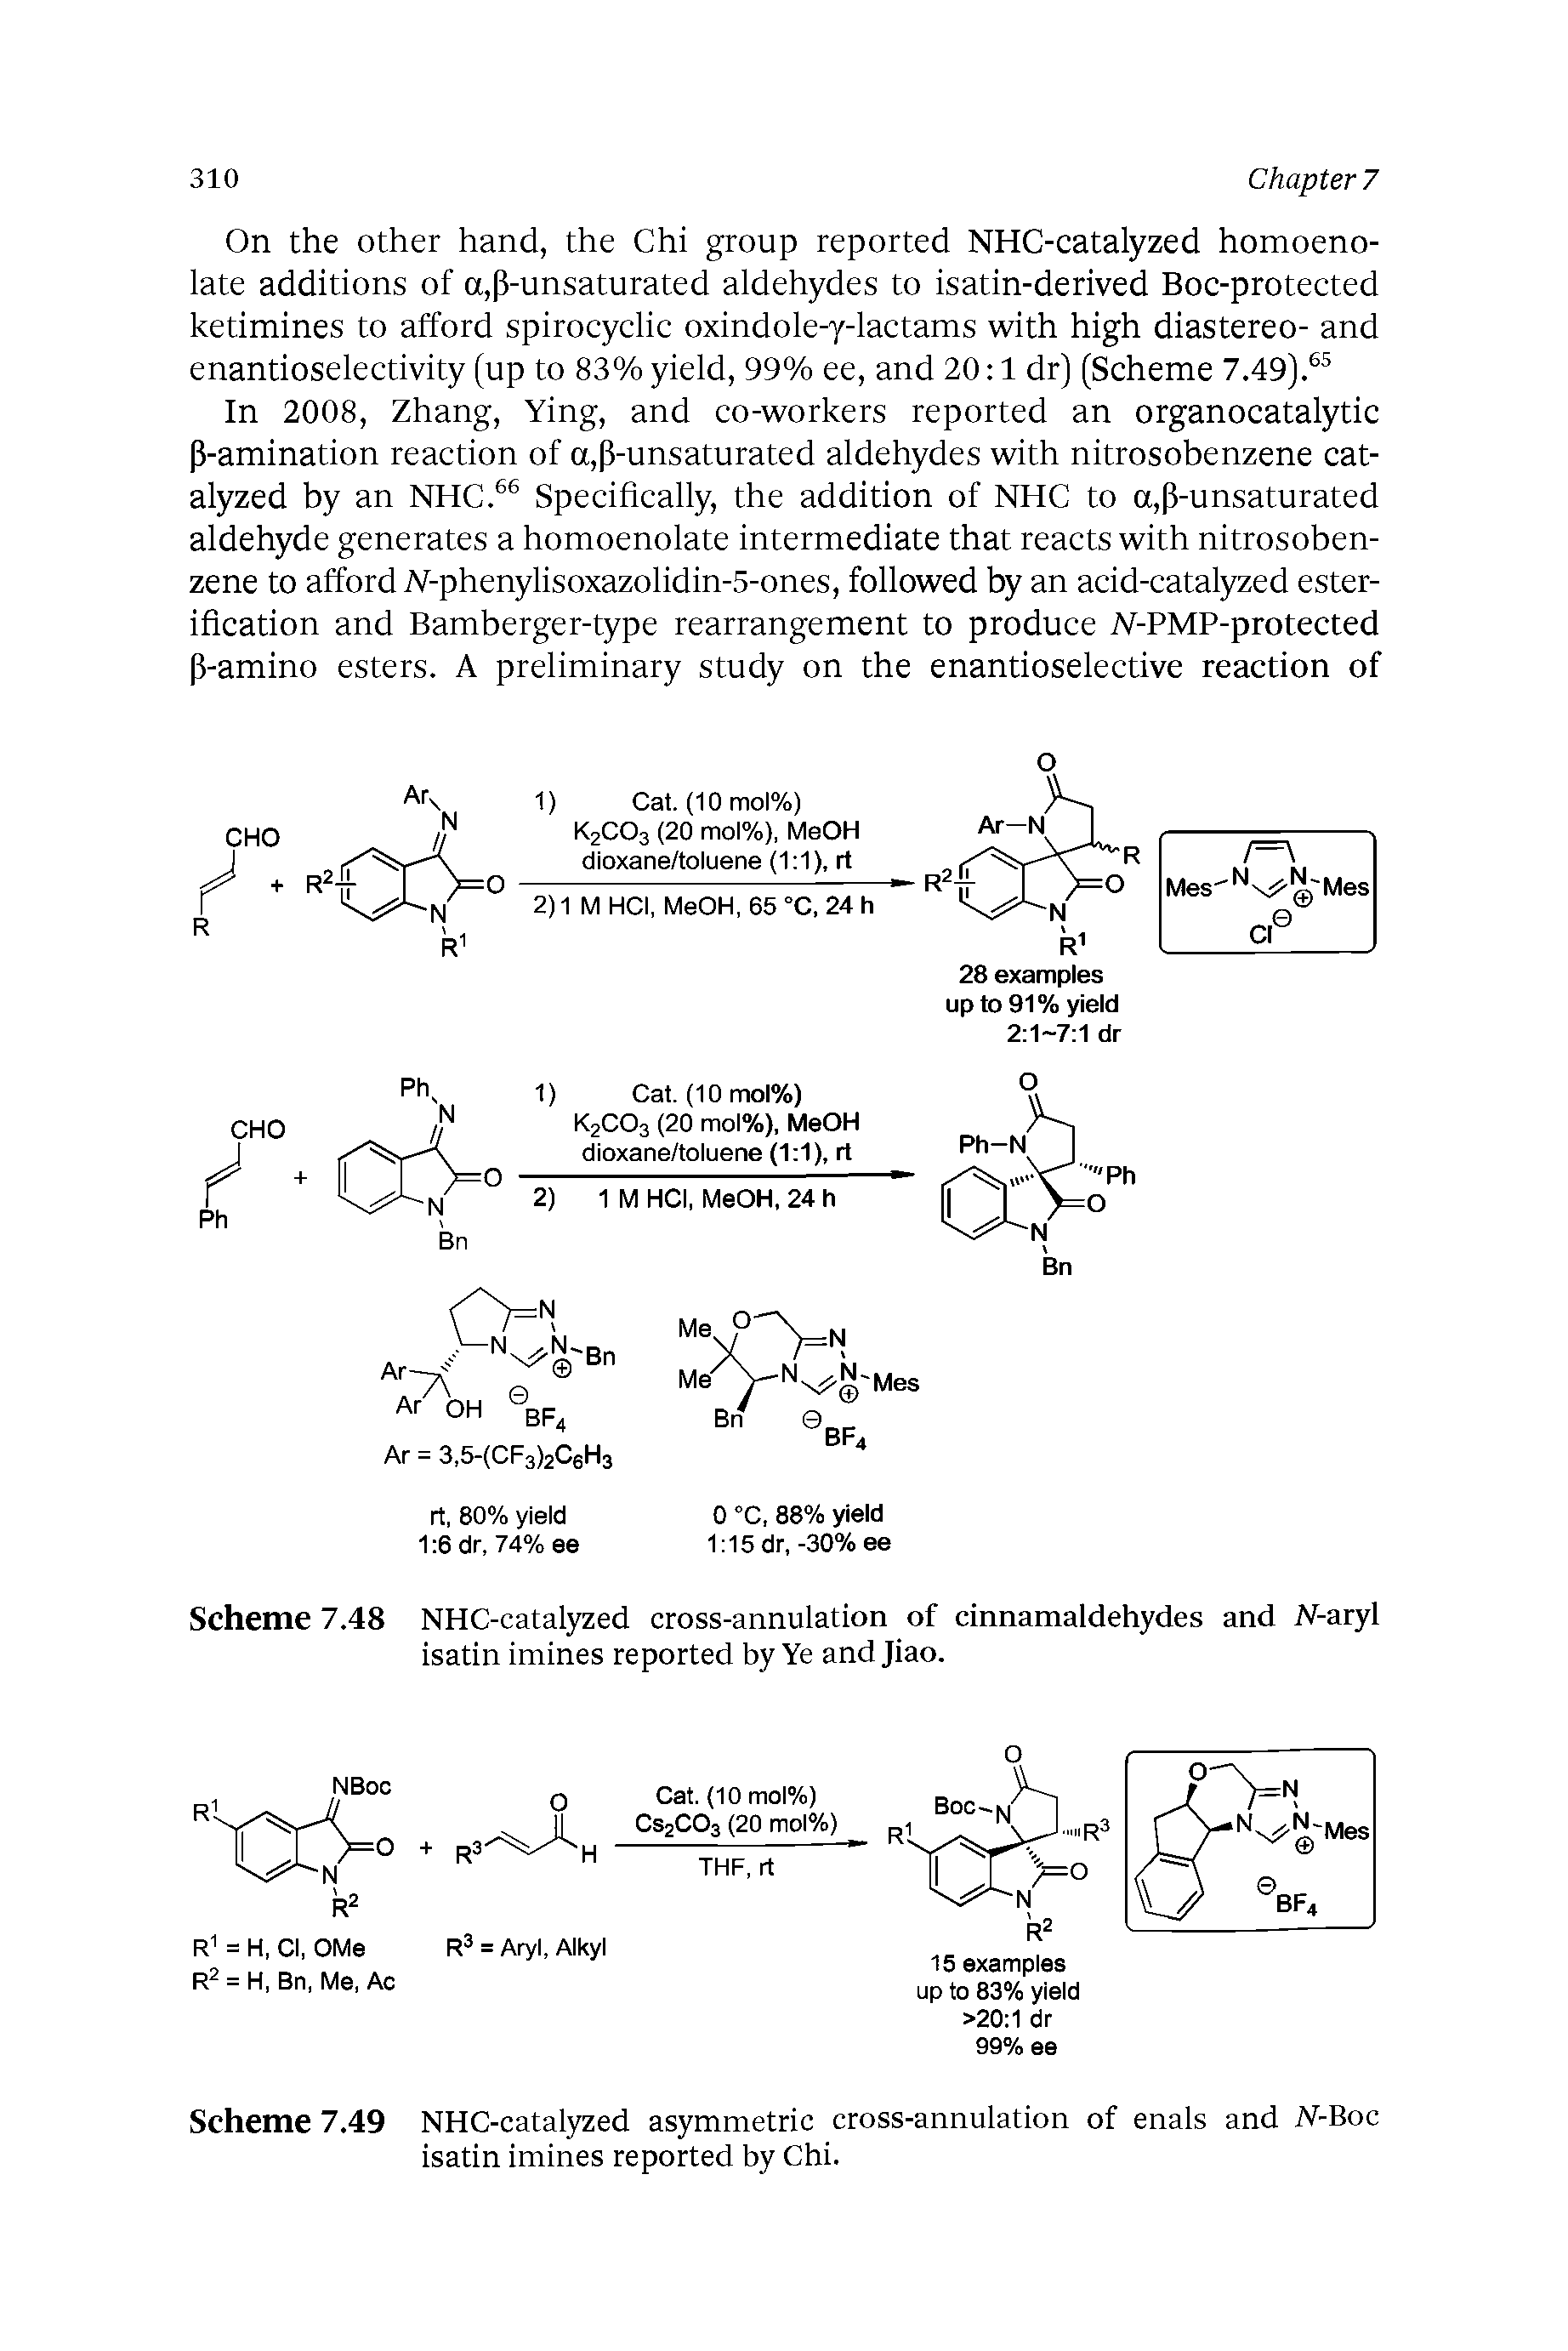 Scheme 7.48 NHC-catalyzed cross-annulation of cinnamaldehydes and N-aryl isatin imines reported by Ye and Jiao.